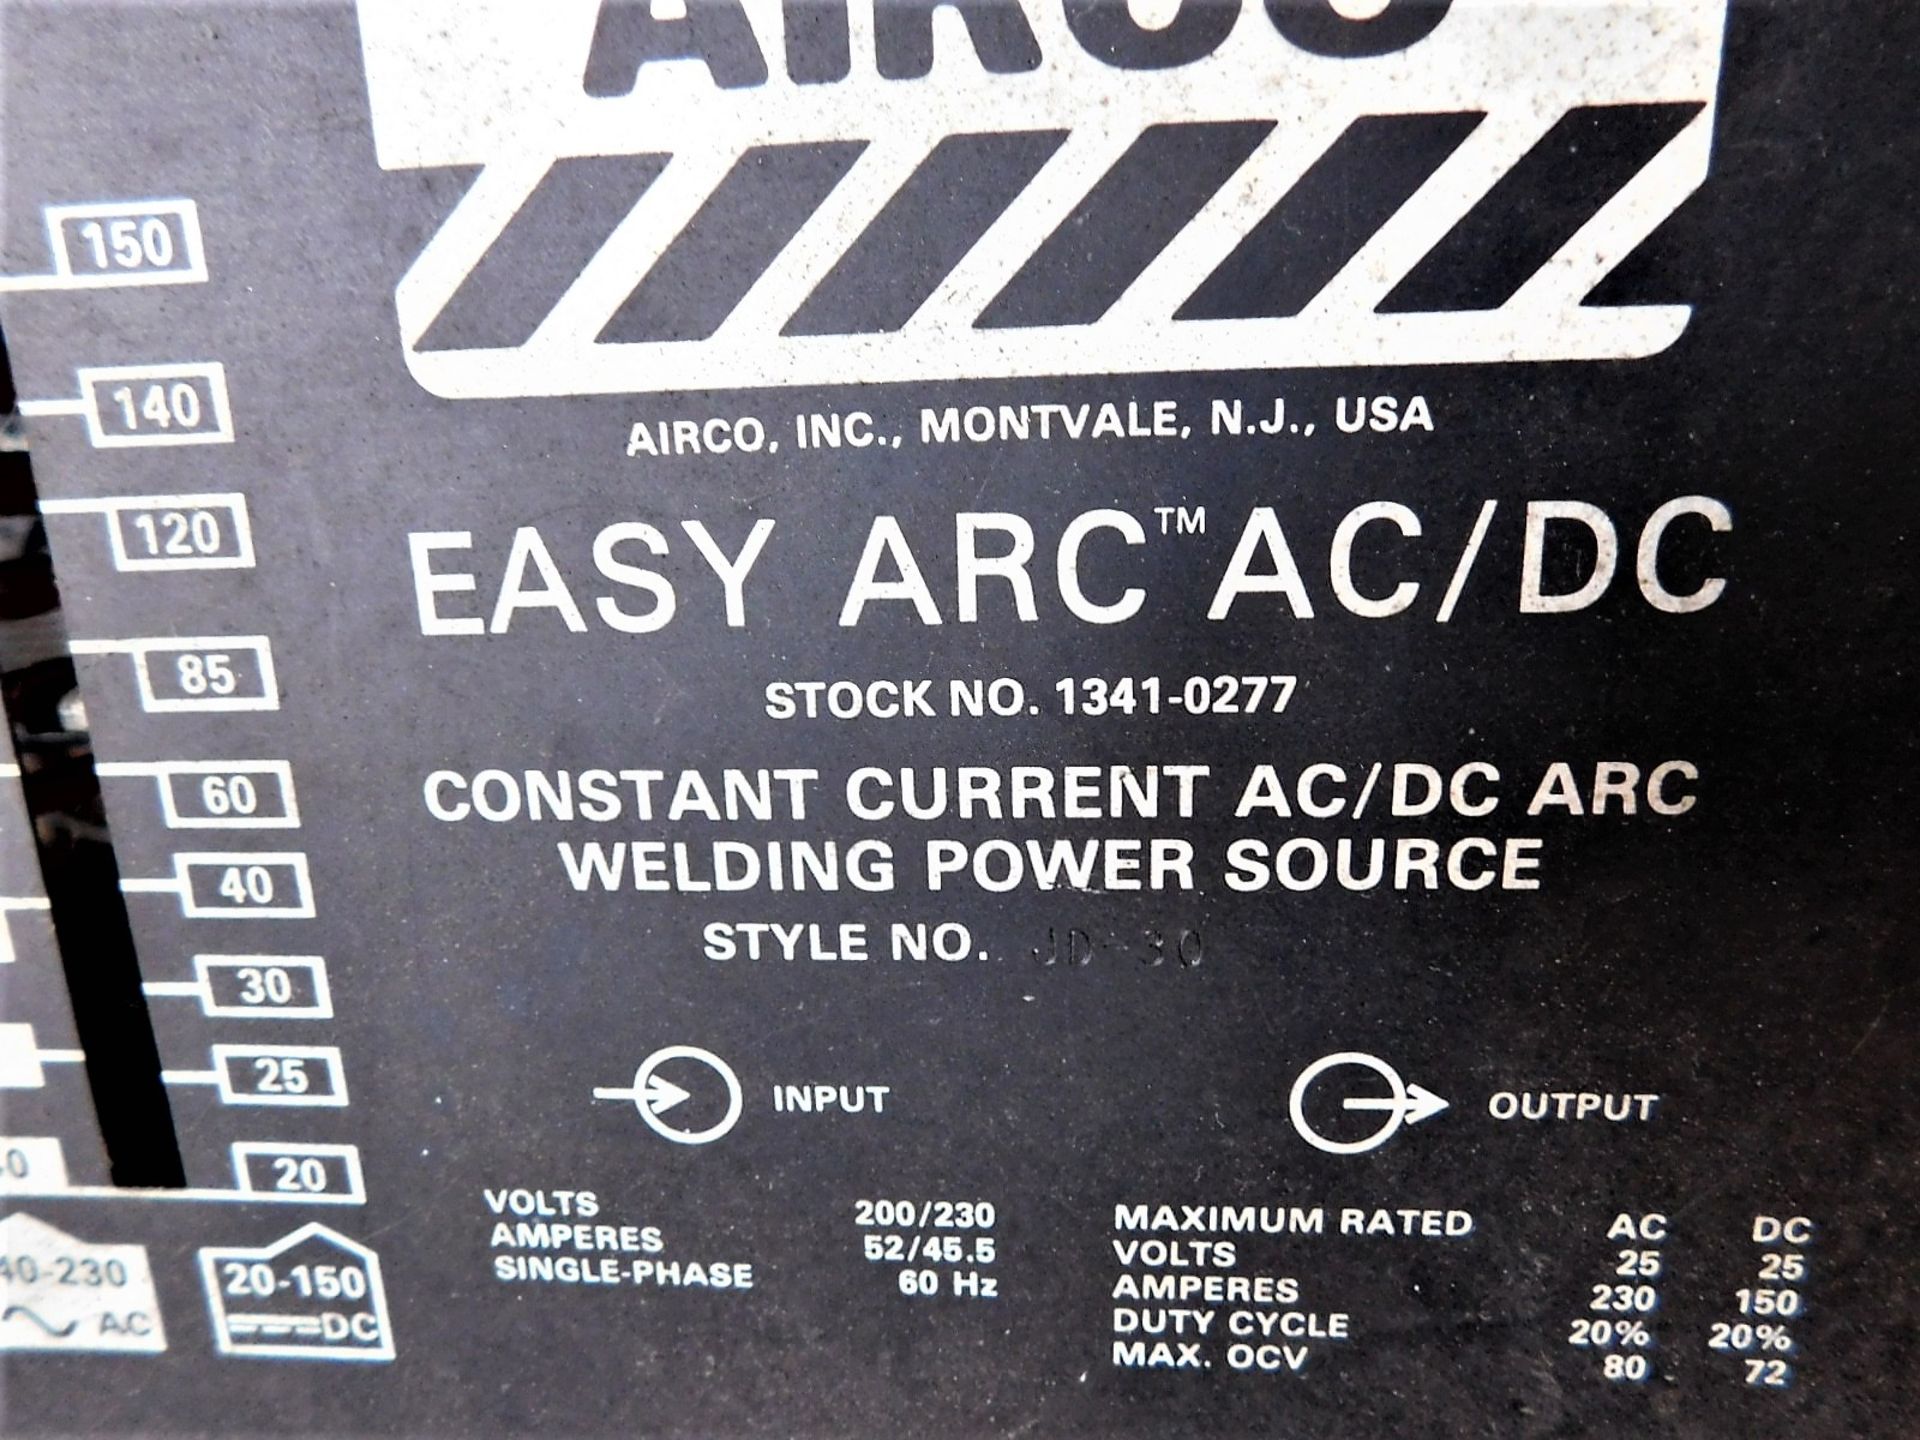 AIRCO EASY ARC AC/DC ARC WELDING POWER SOURCE, STOCK NO. 1341-0277, MODEL JD-30 - Image 3 of 3